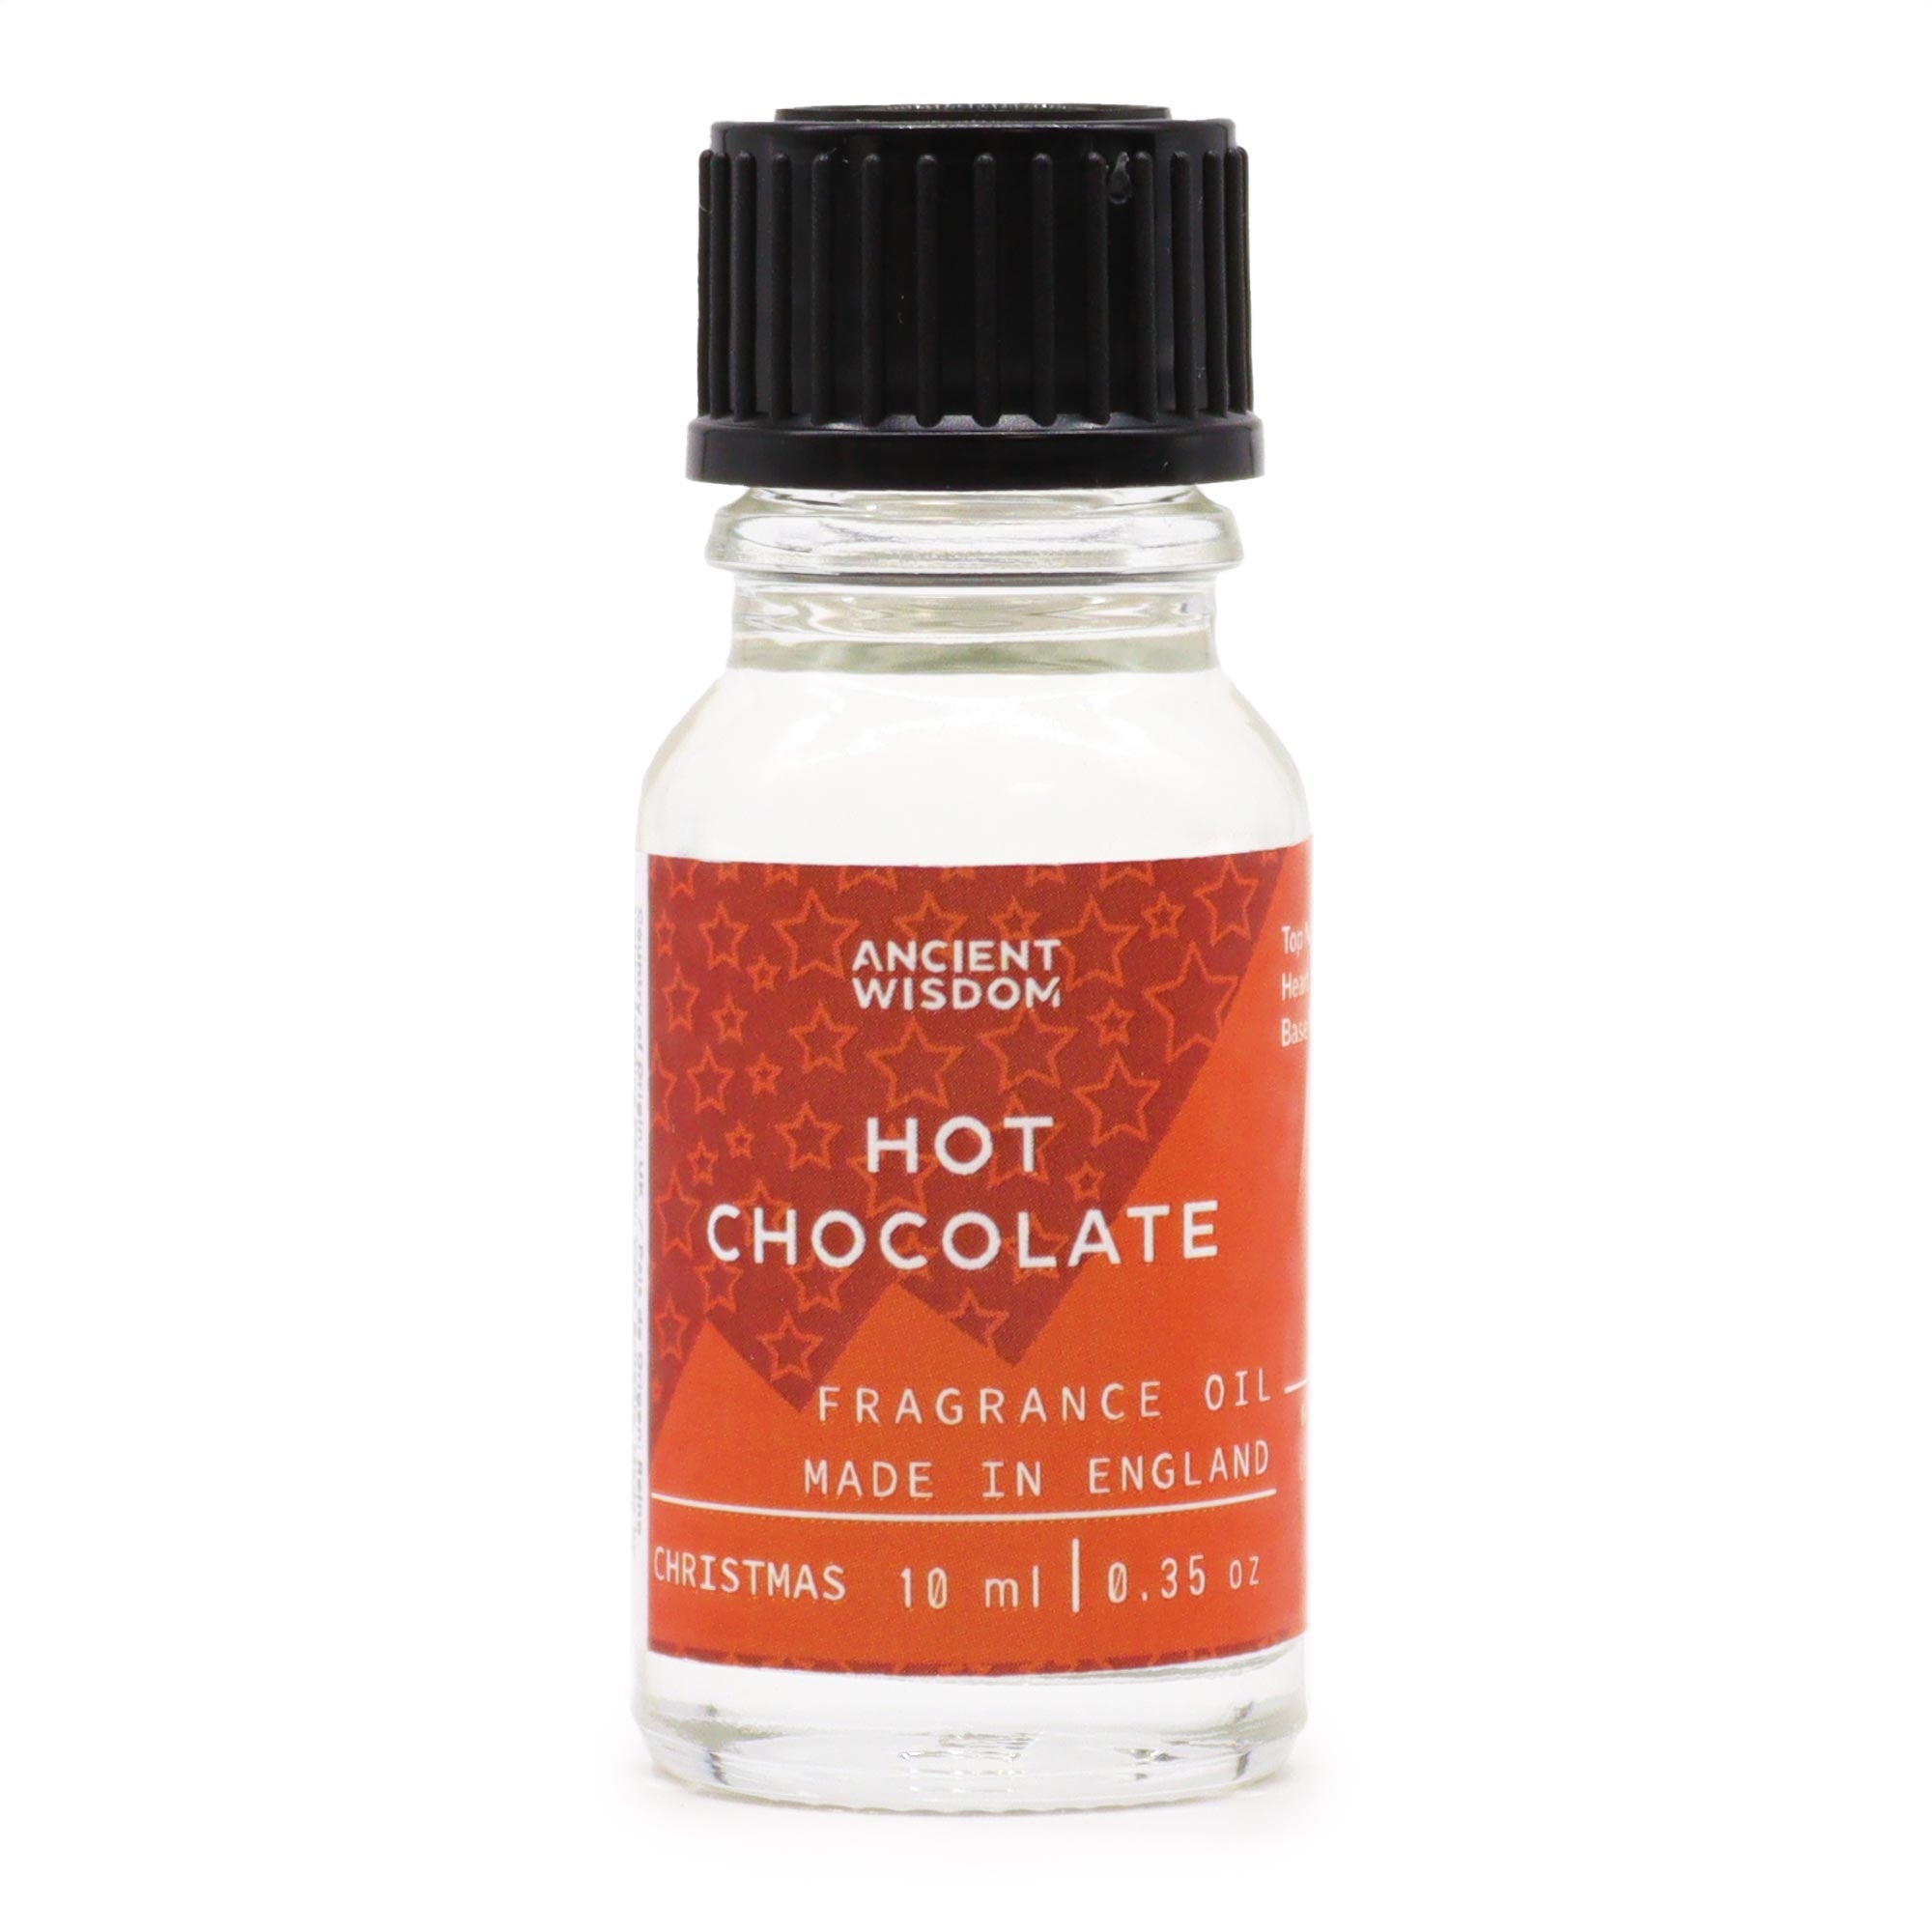 View Hot Chocolate Fragrance Oil 10ml information